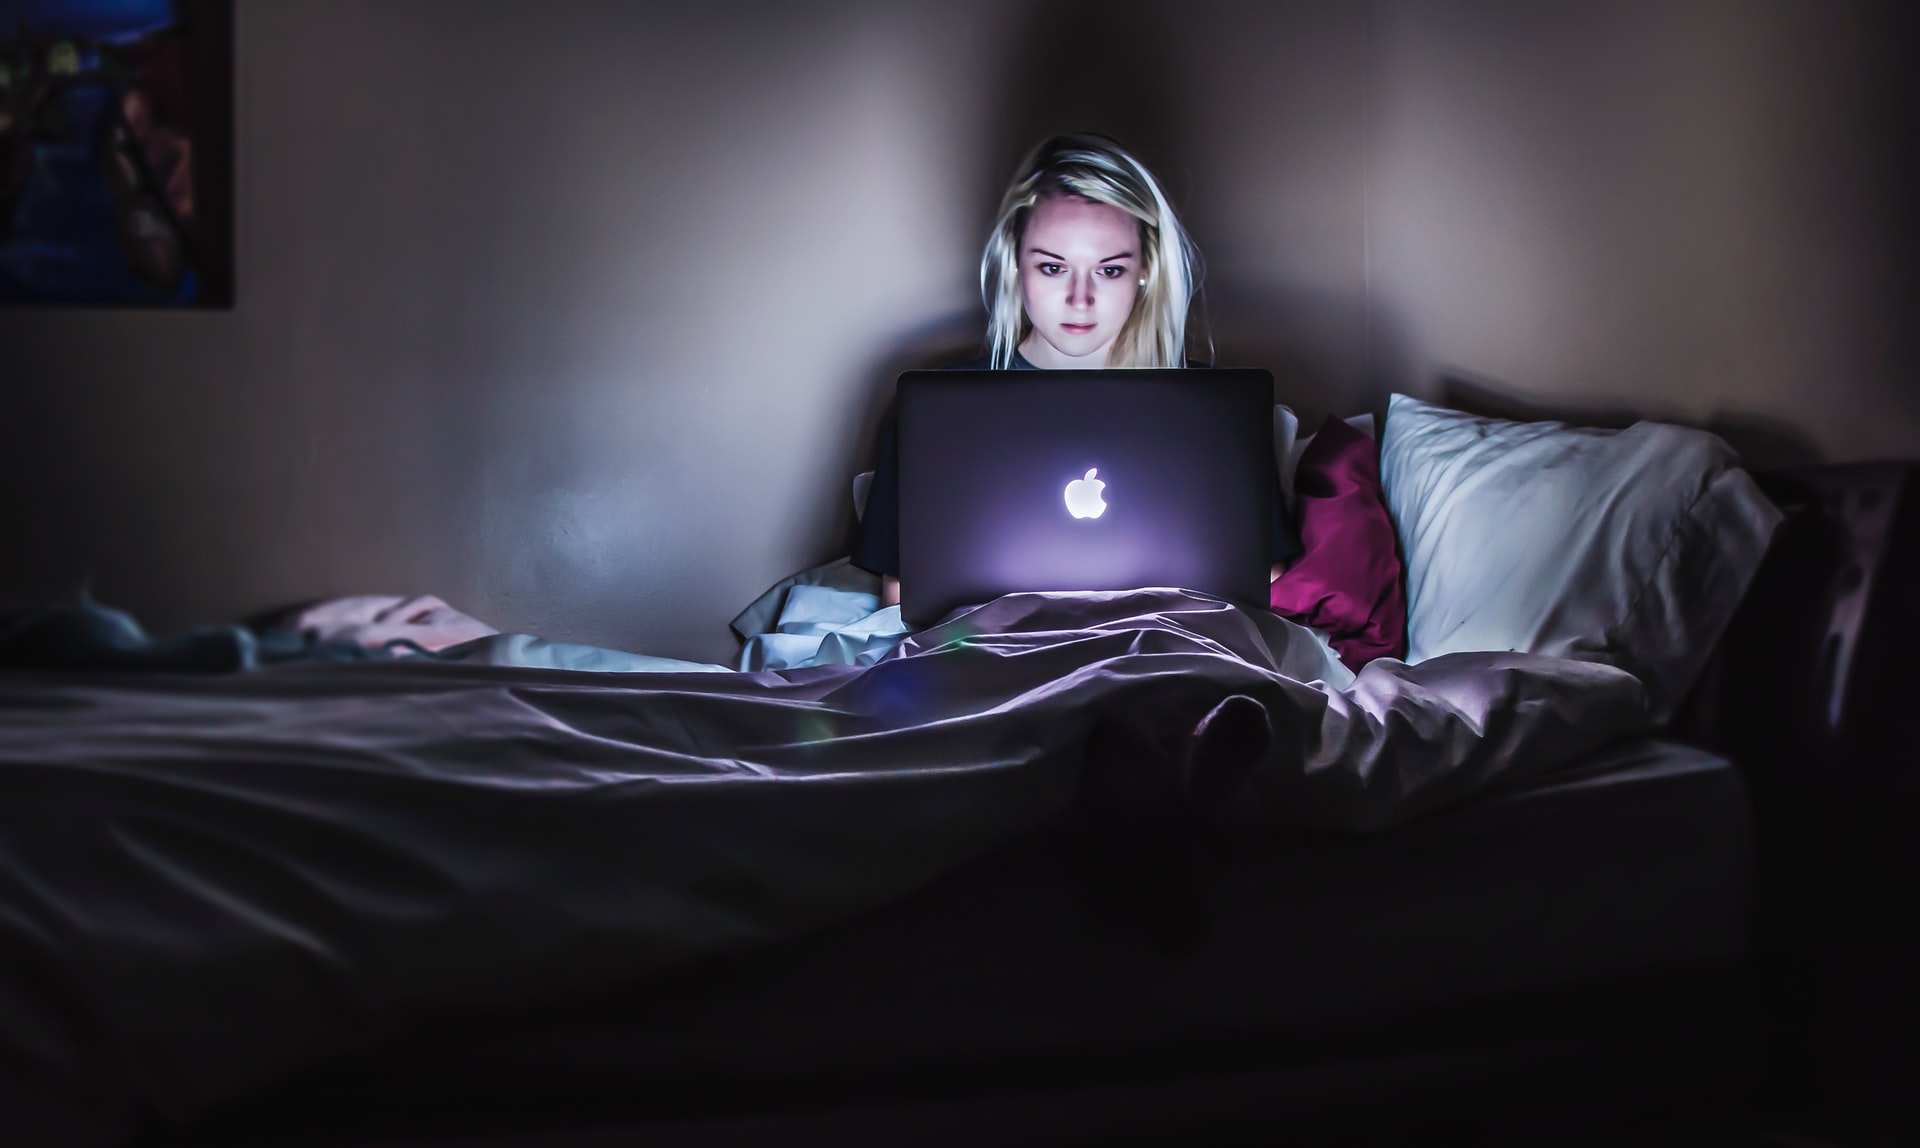 Disturbing findings from an online porn study